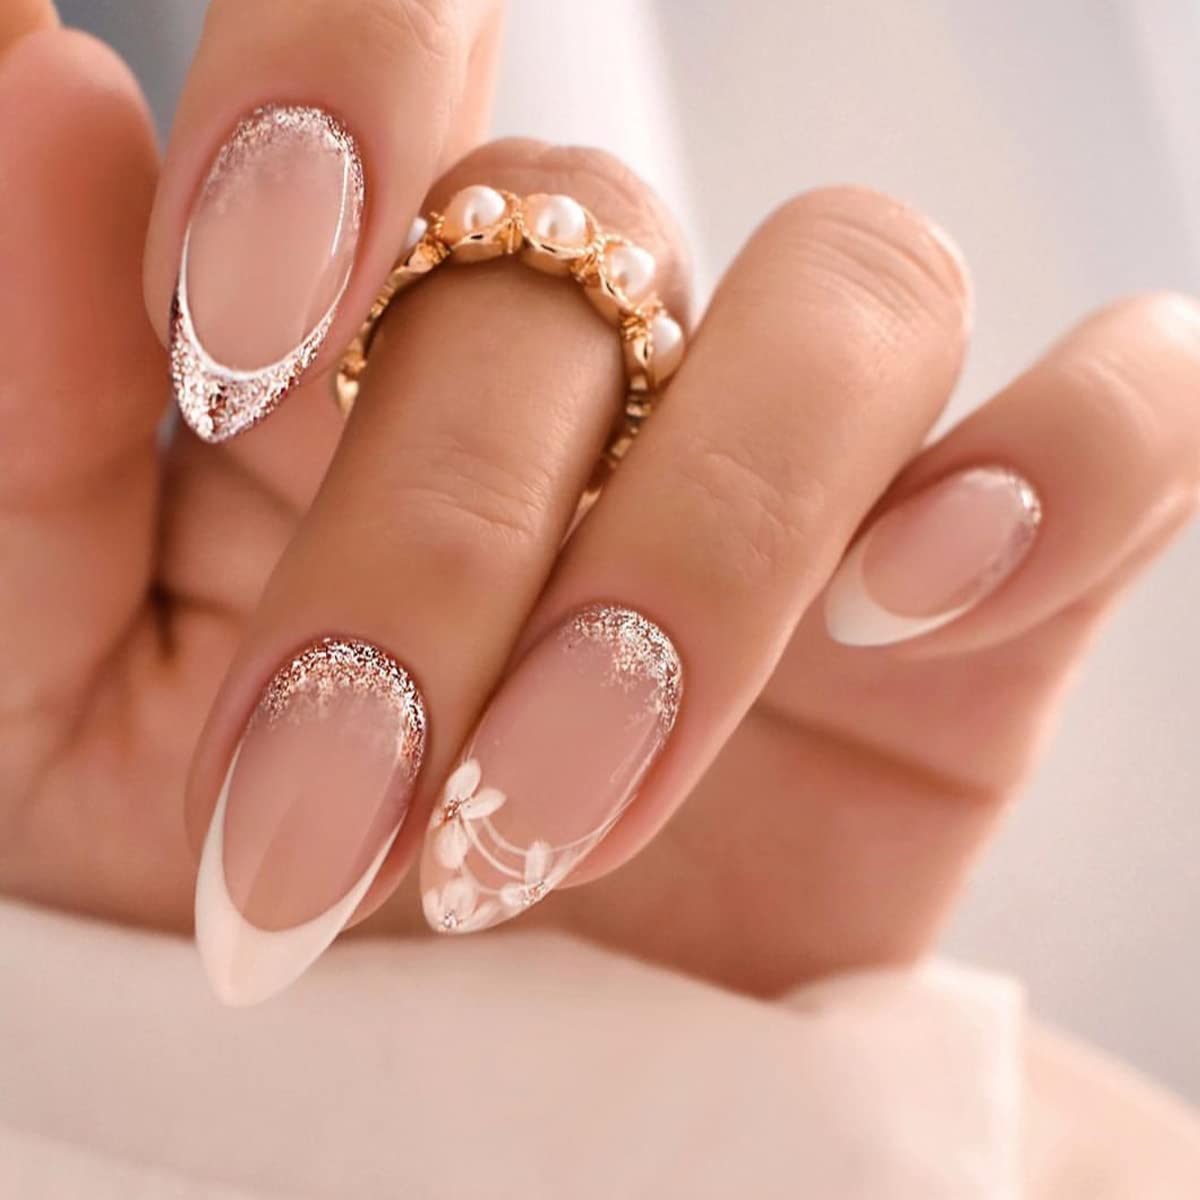 Amazon.com: Fall Press on Nails Medium Fake Nails, LPOODDNU Winter Press on  Nails Almond Shape False Nail Tips Black Nude Glue on Nails Cute Stick on  Nails French Manicure Decorations for Women,